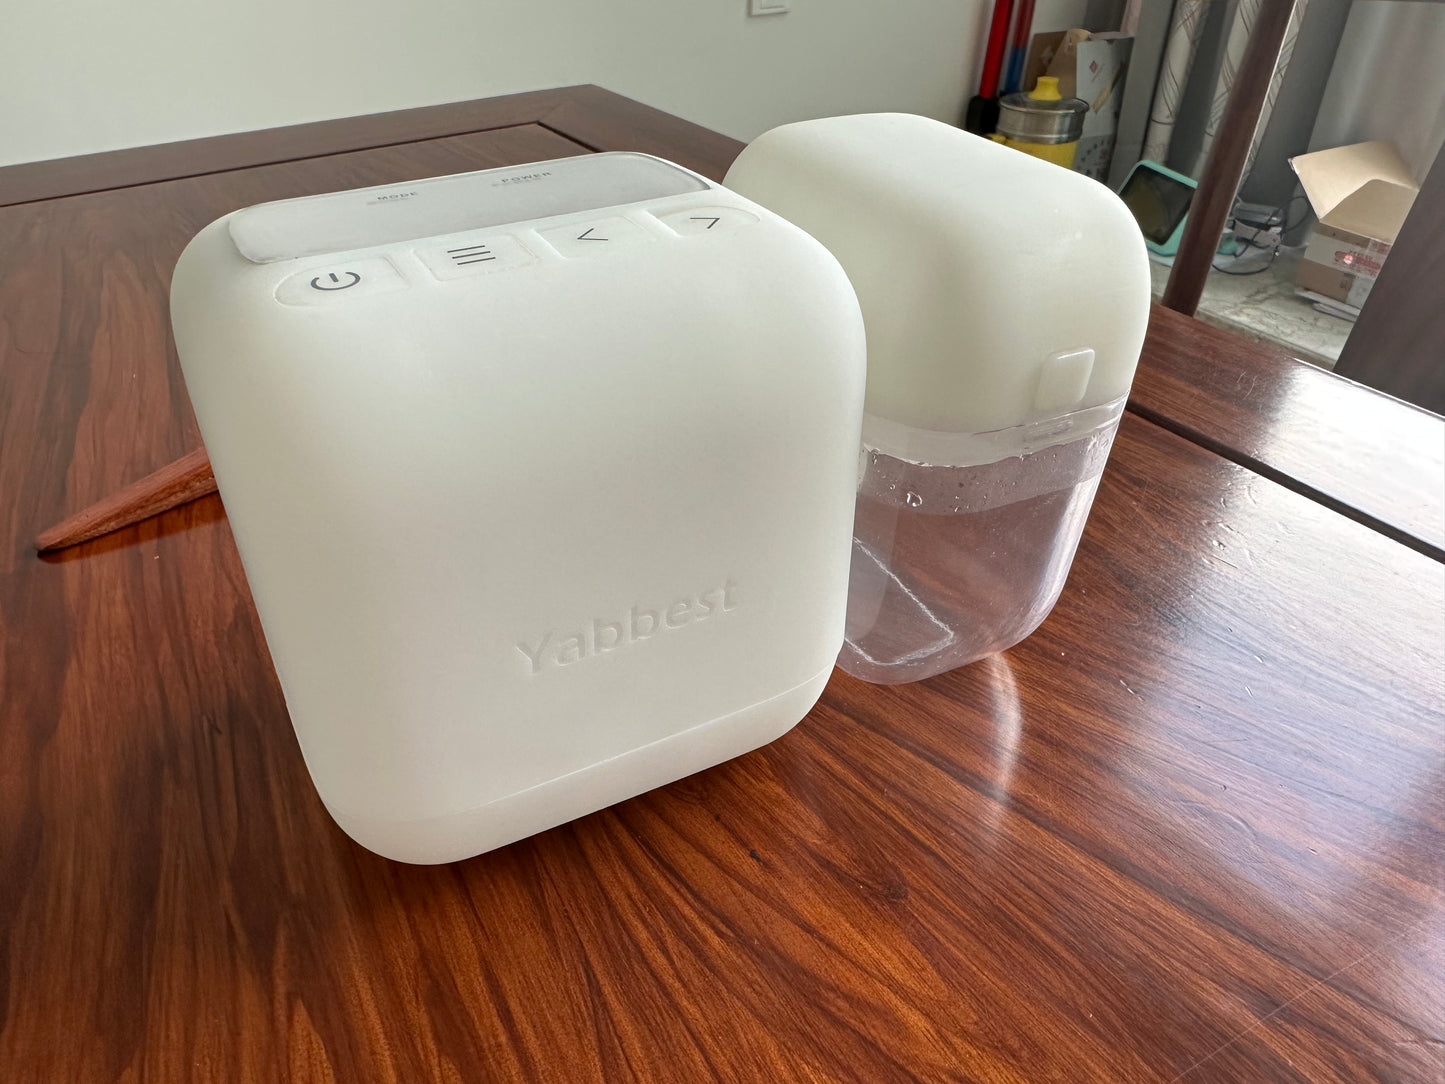 Yabbest Electric Nasal Irrigators, two mode for nasal care